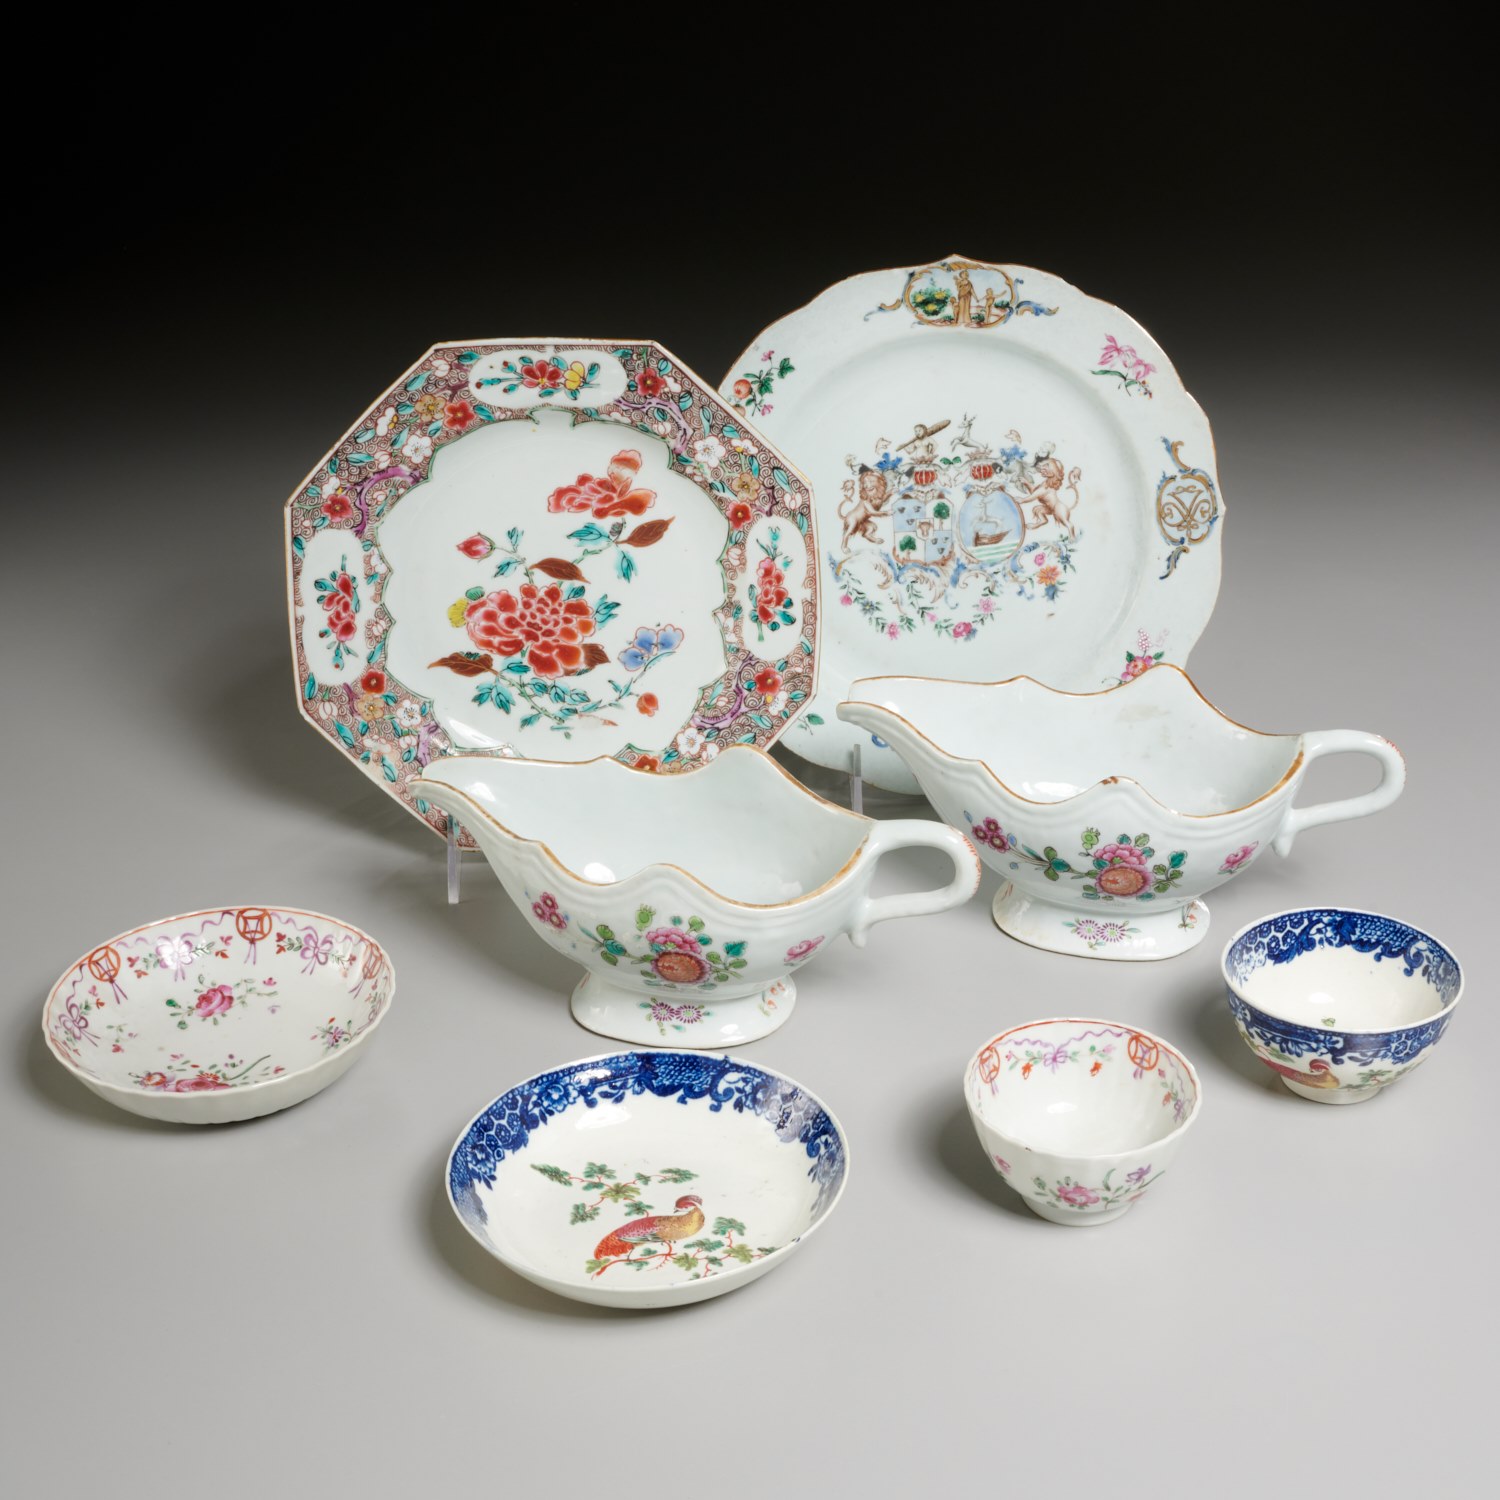 GROUP OLD CHINESE EXPORT PORCELAINS 2a5da4